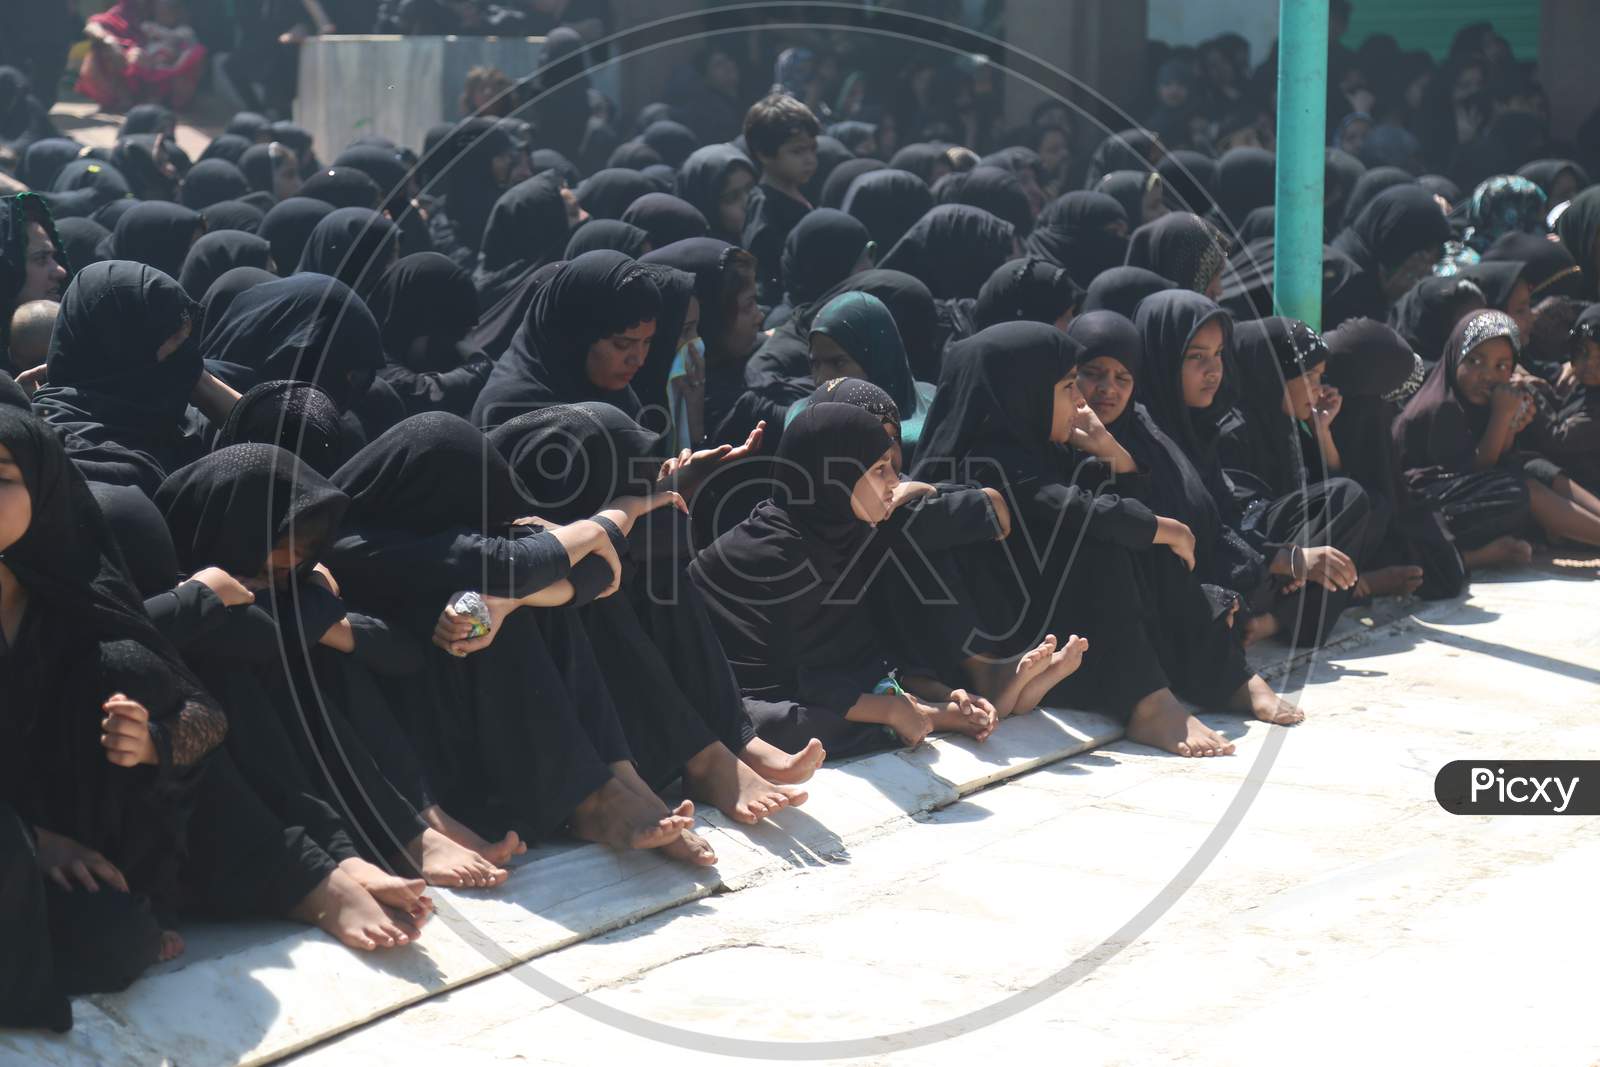 Shiite Muslim mourners flagellating themselves during a procession on the tenth day of Muharram which marks the day of Ashura in Ajmer, India.